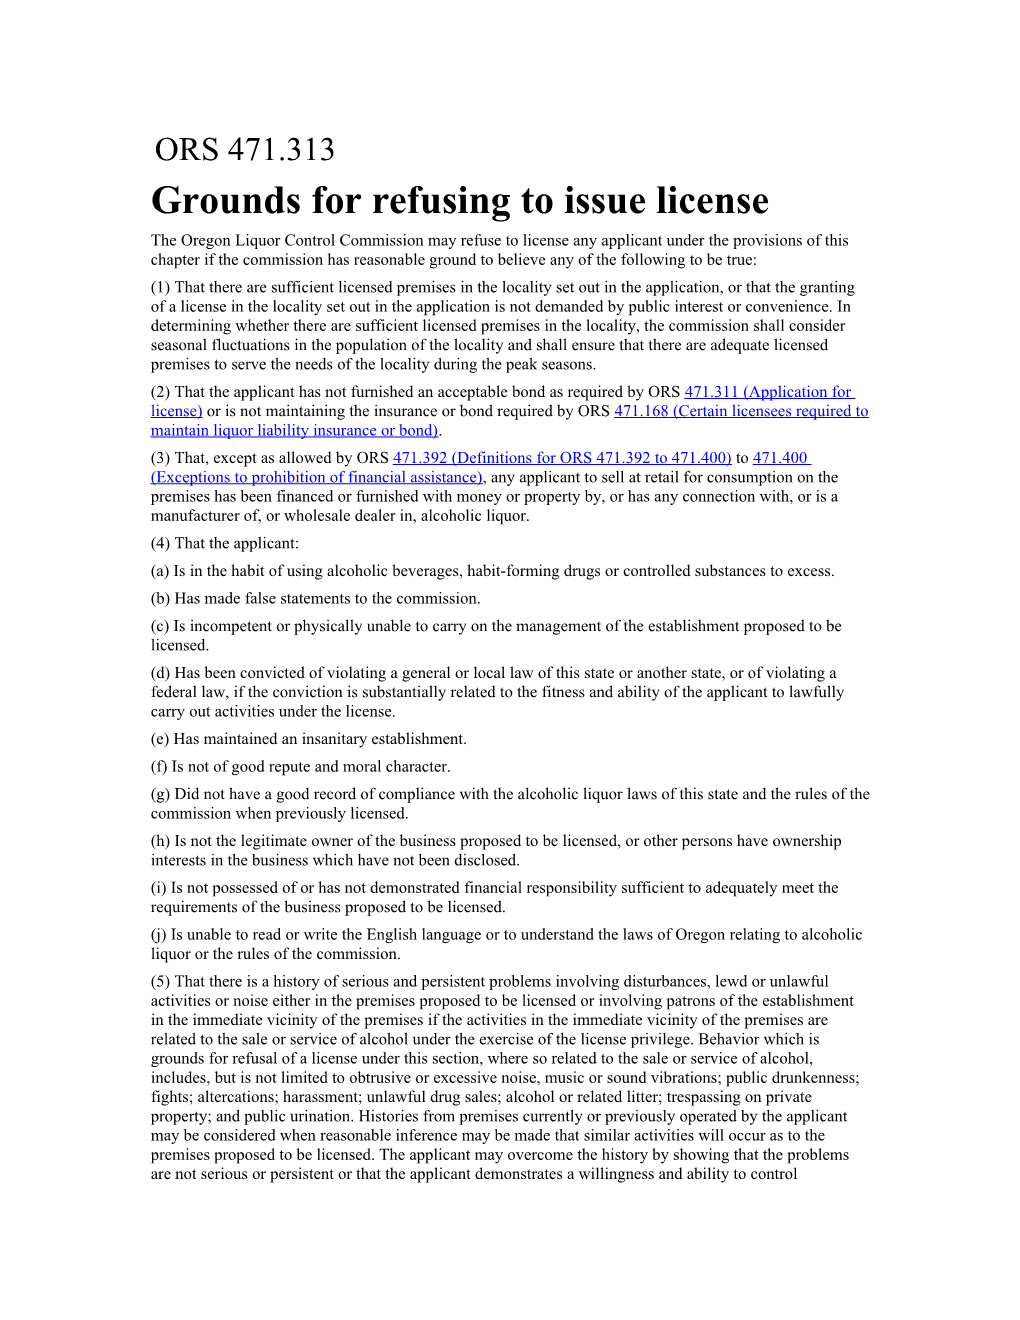 Grounds for Refusing to Issue License